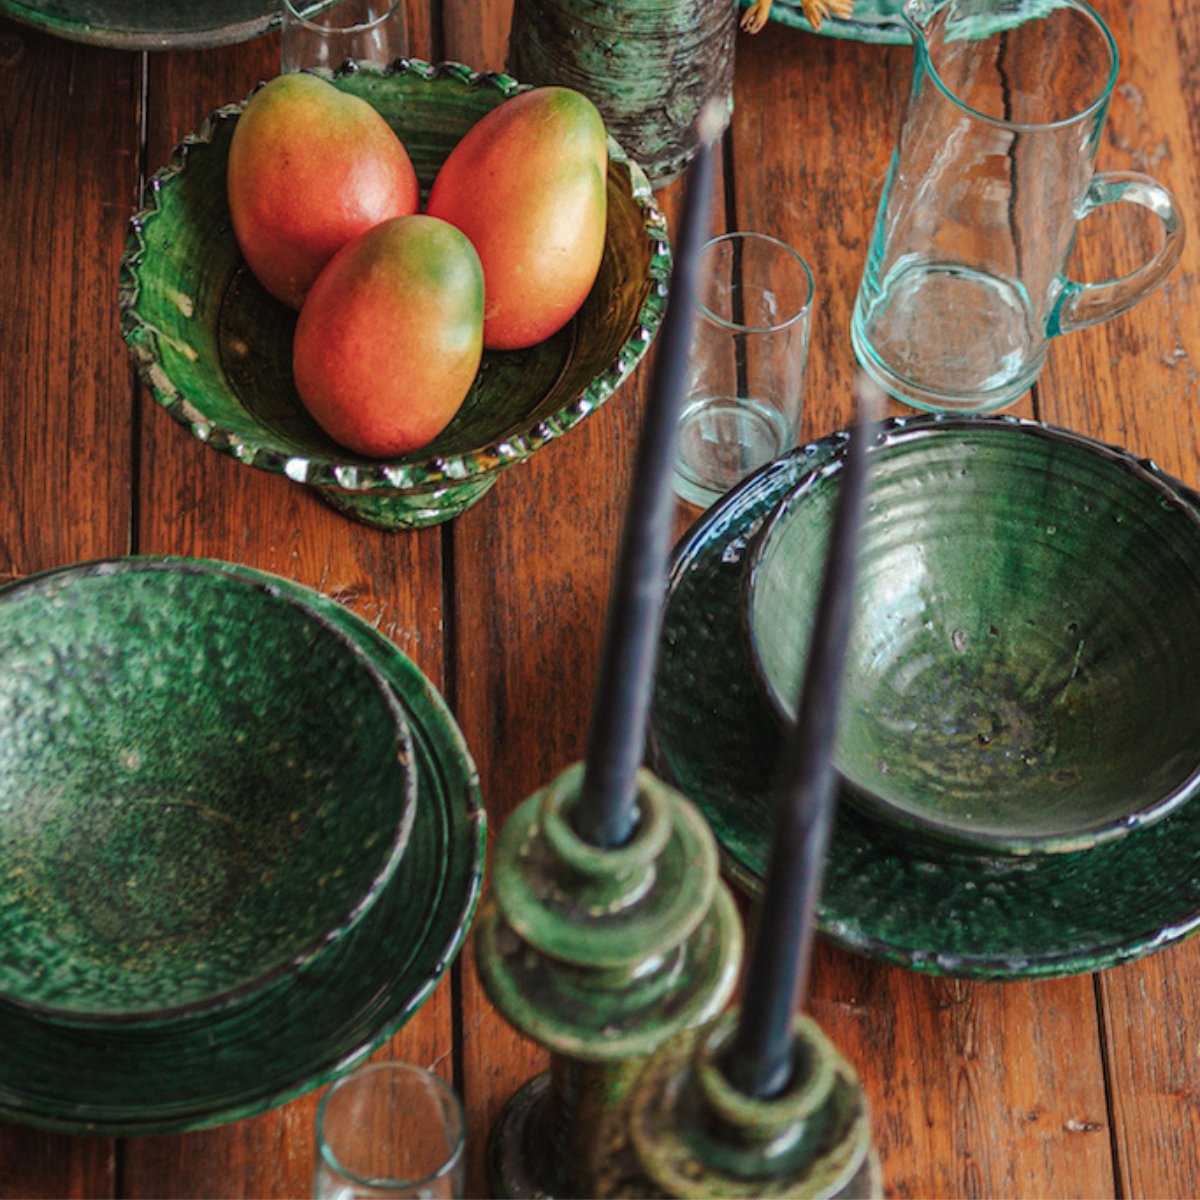 Green Moroccan Tamegroute Pottery bowls and candelabras on a timber table setting - Nouvelle Nomad